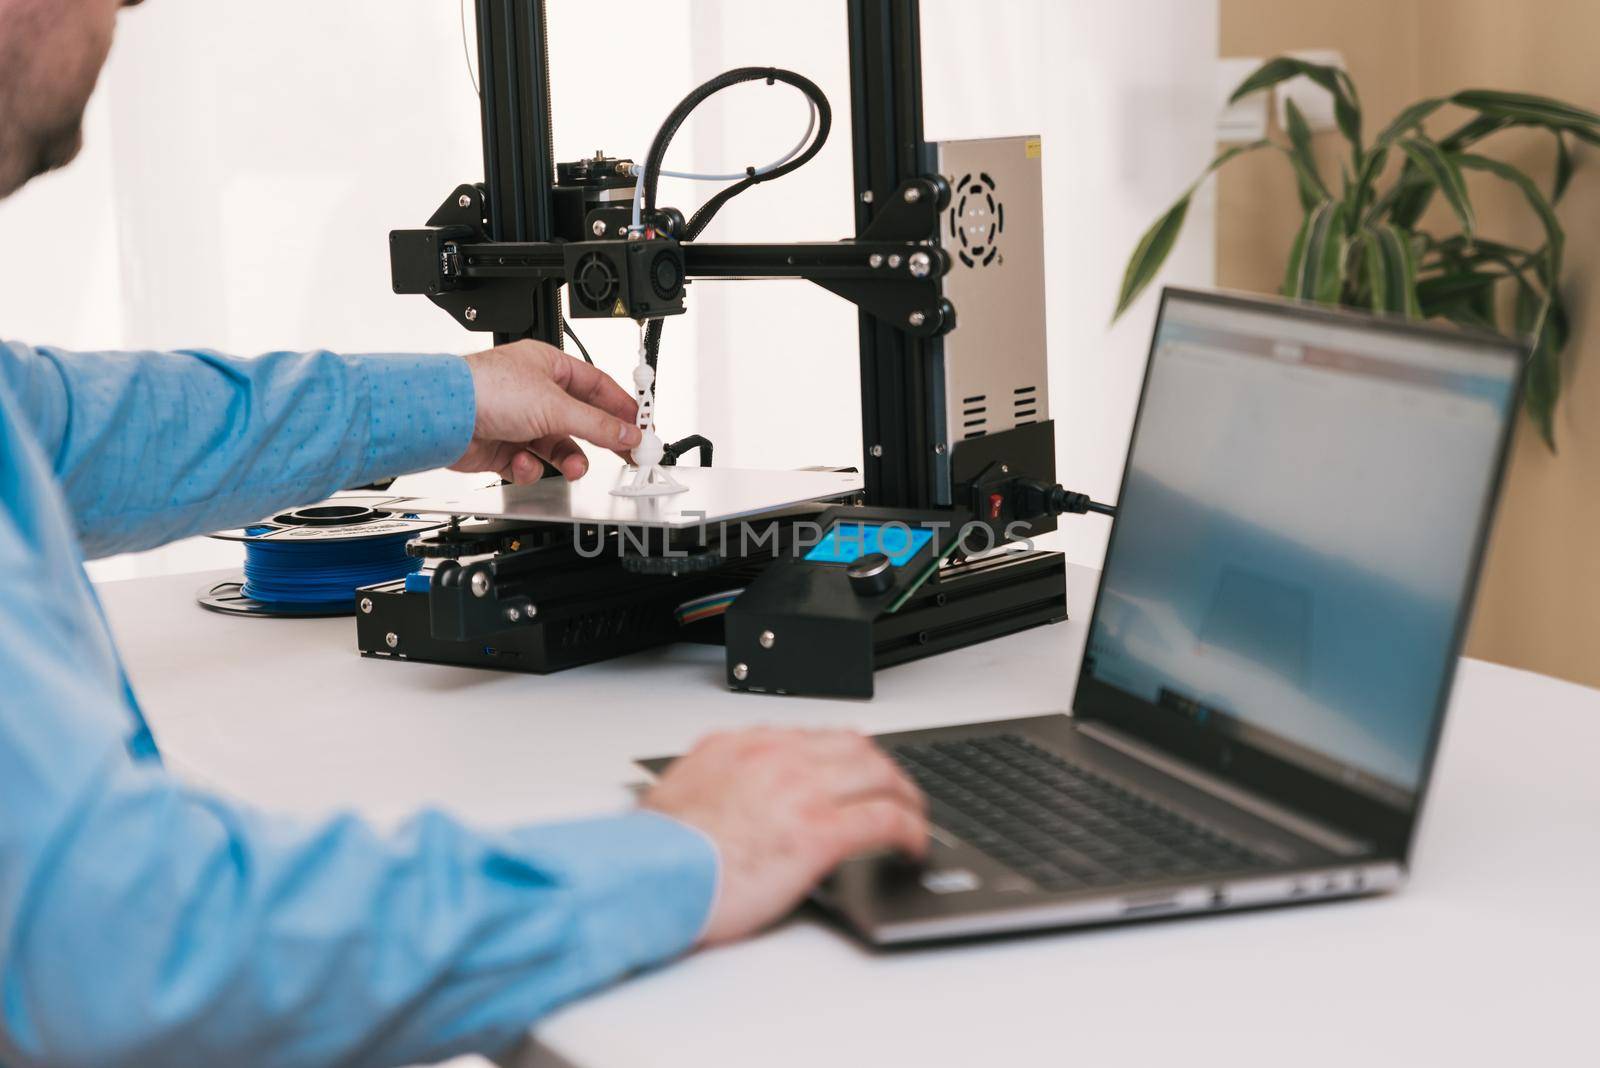 Young engineer in the lab adjusting a 3D printer's components.